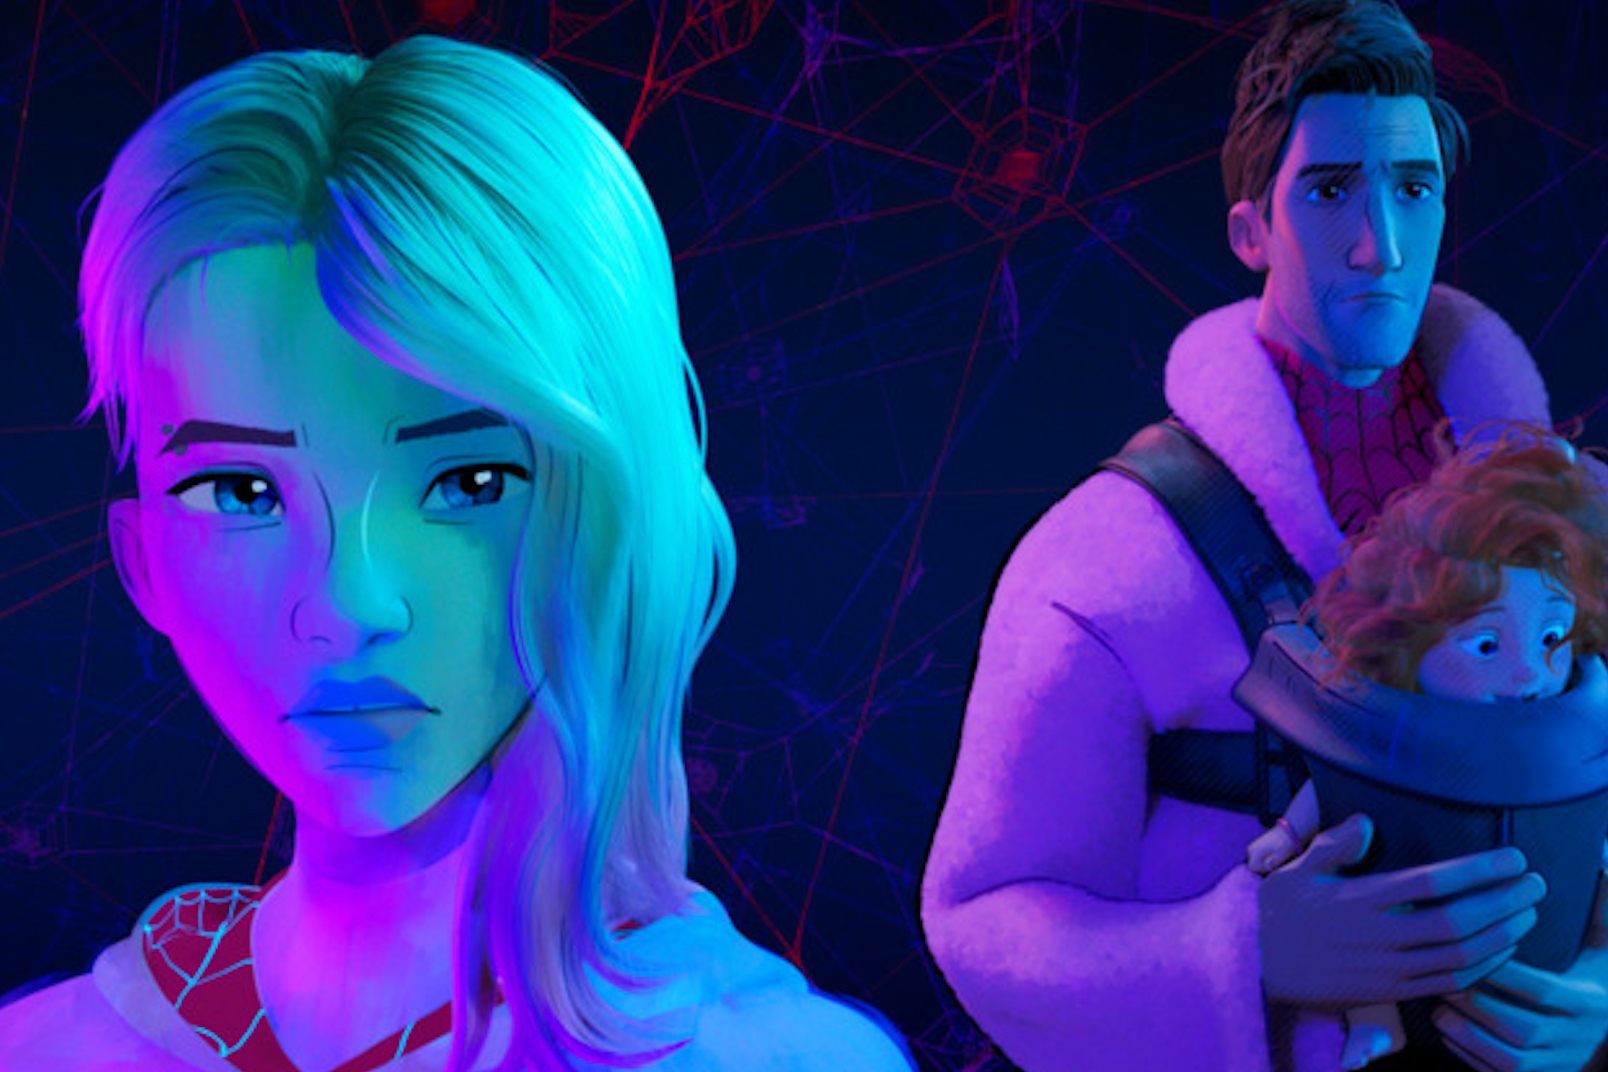 Spider-Man Across the Spider-Verse: 3 Important Qualities Of The